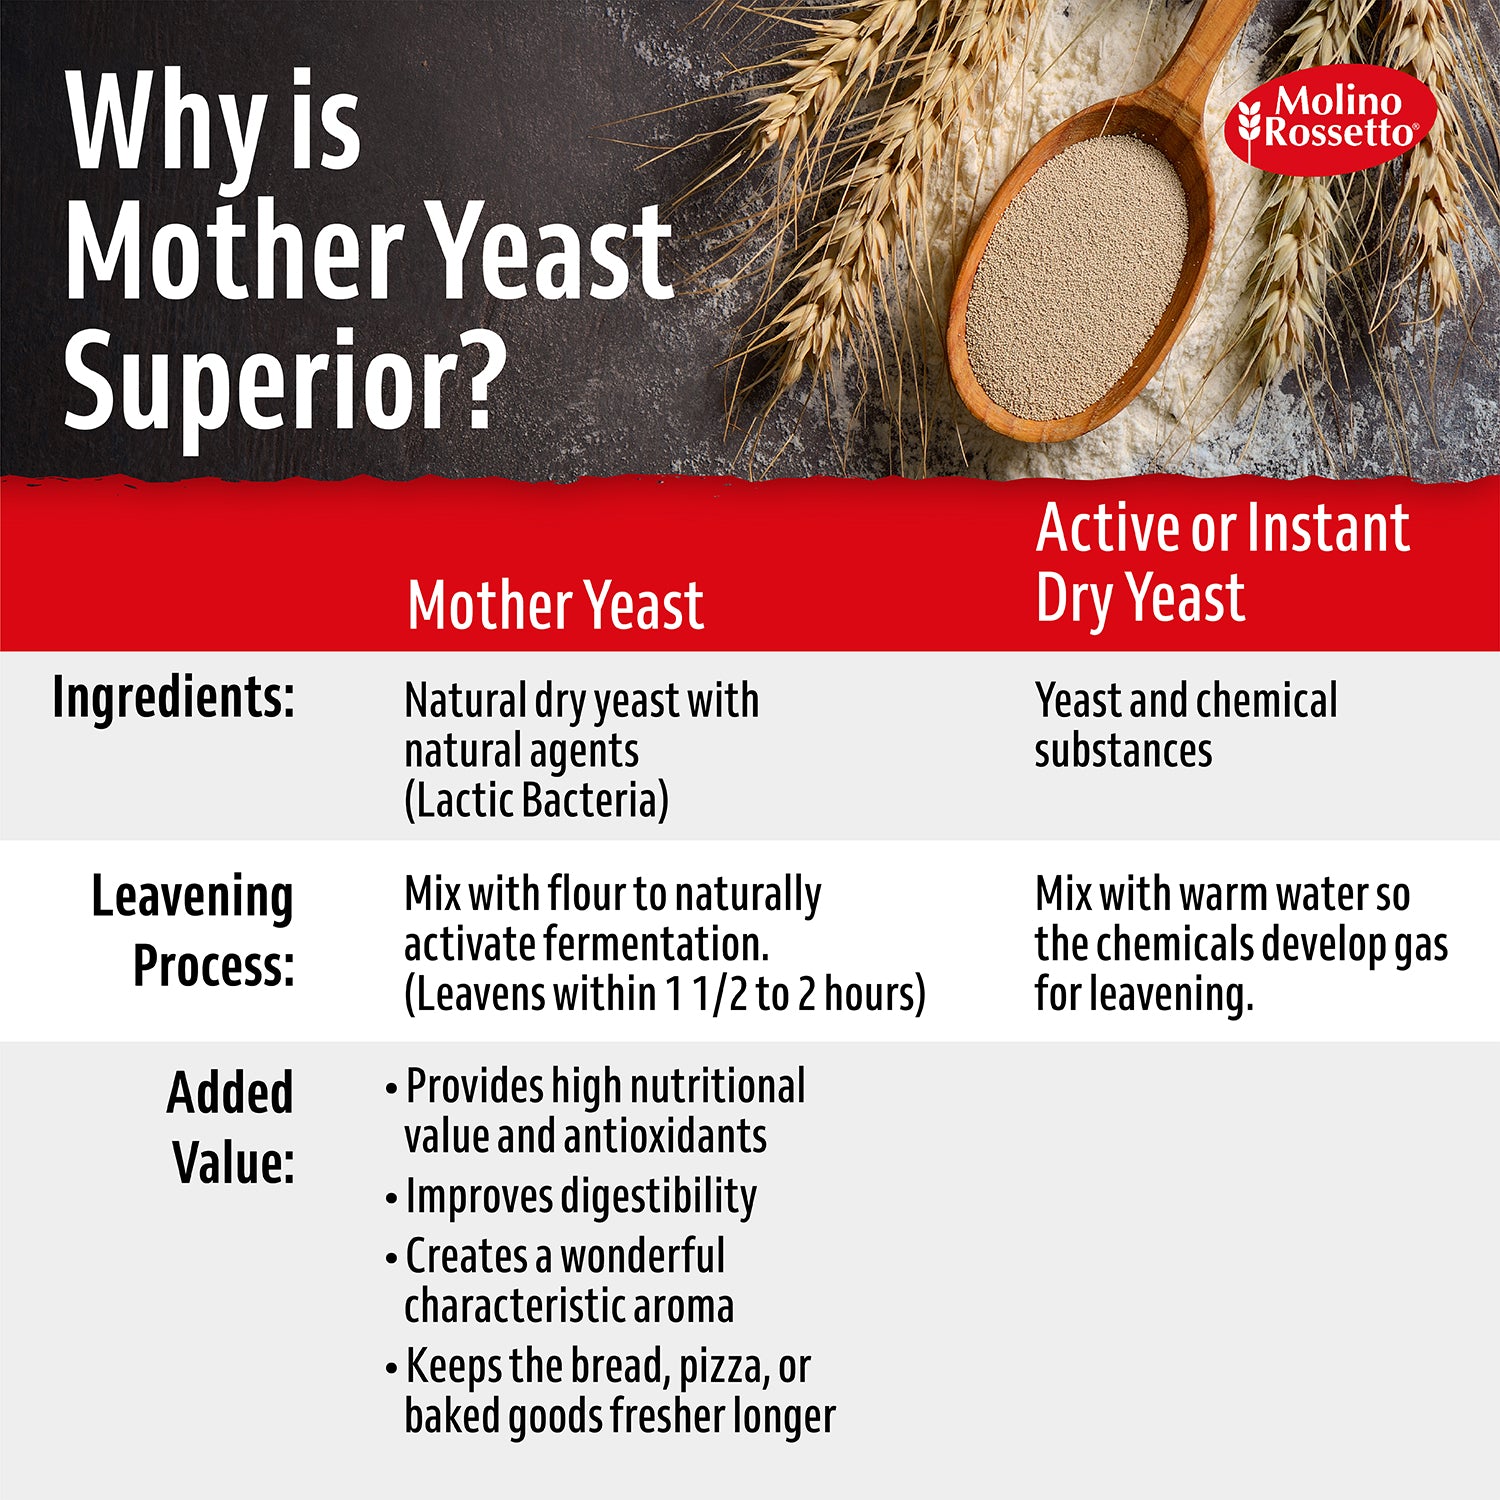 Rapid-Rise Dry Yeast for Baking - Instant Yeast for Baking by Molino Rossetto